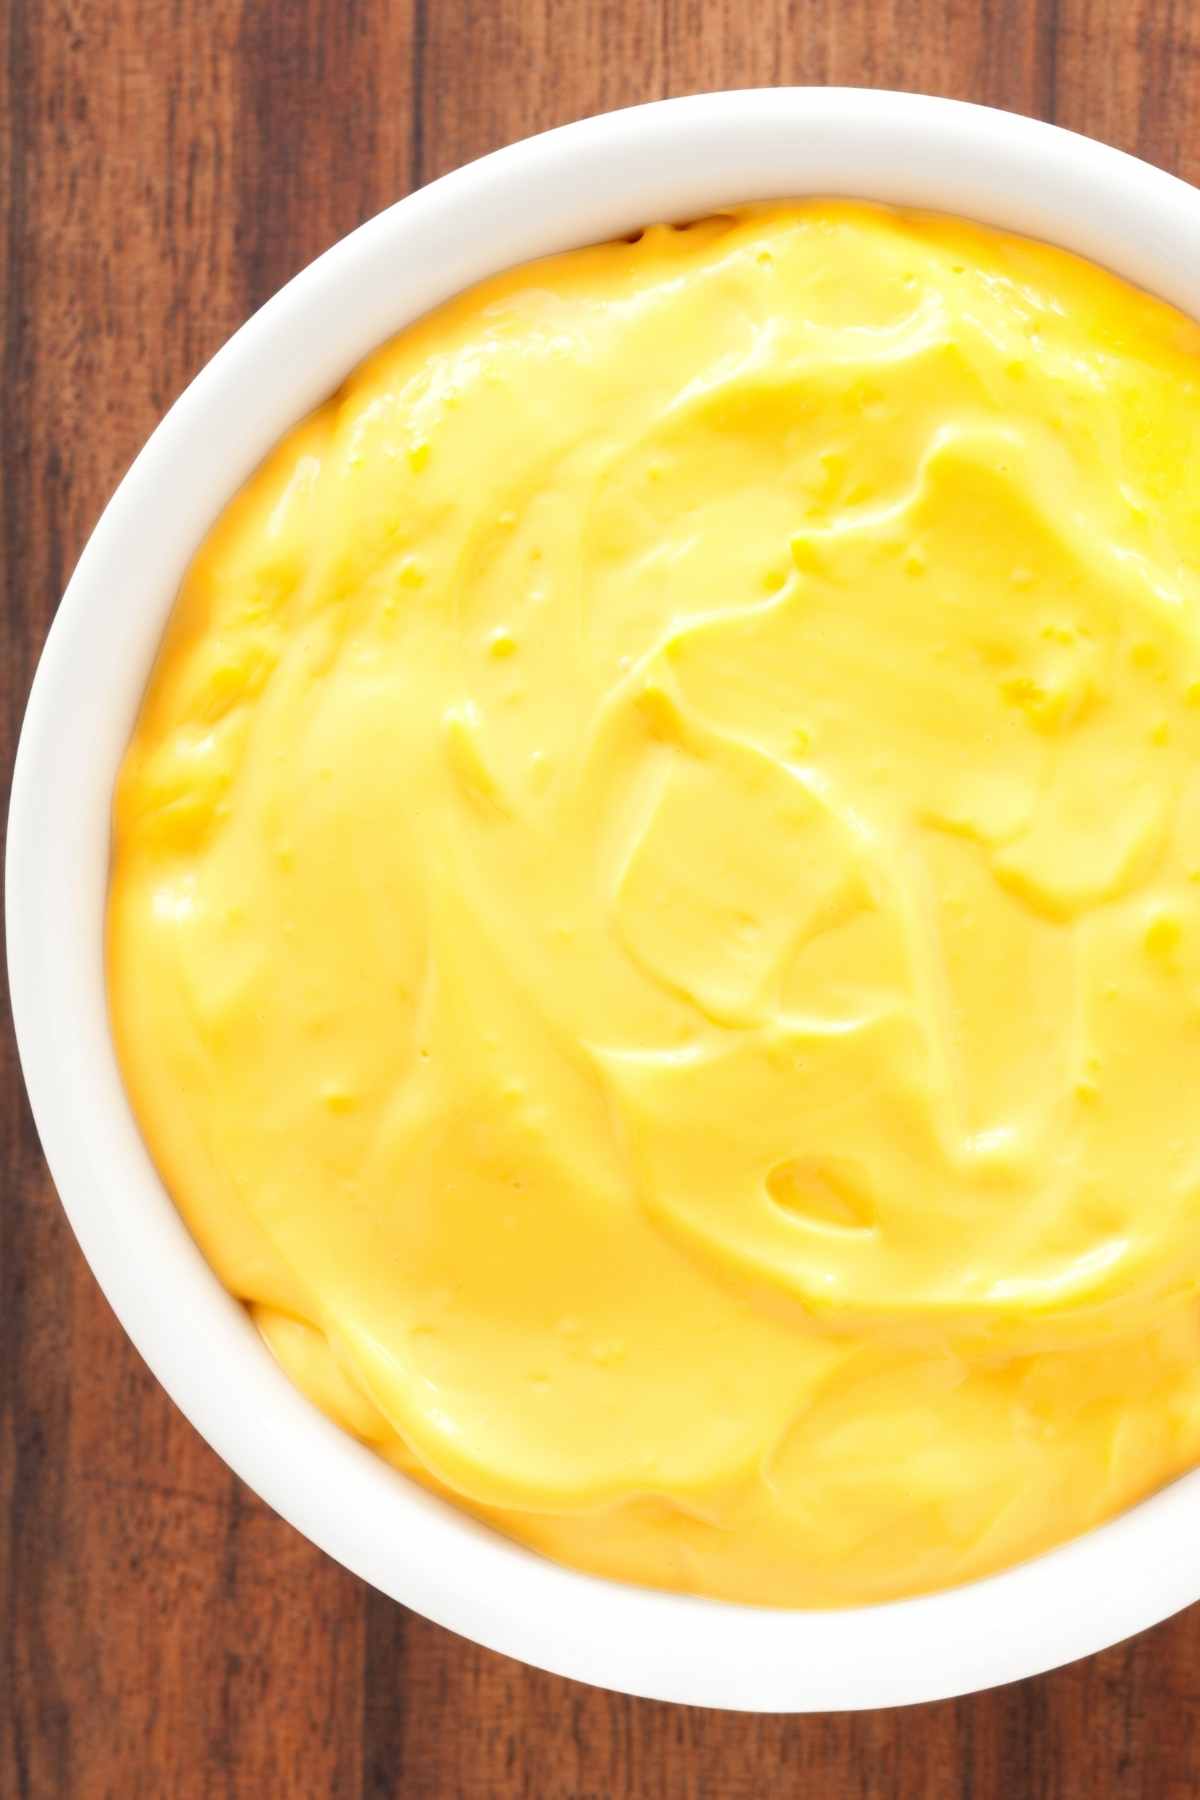 This homemade cheez whiz is rich, flavourful, and so easy to make. It’s made with real cheese and so much better than the store-bought version.